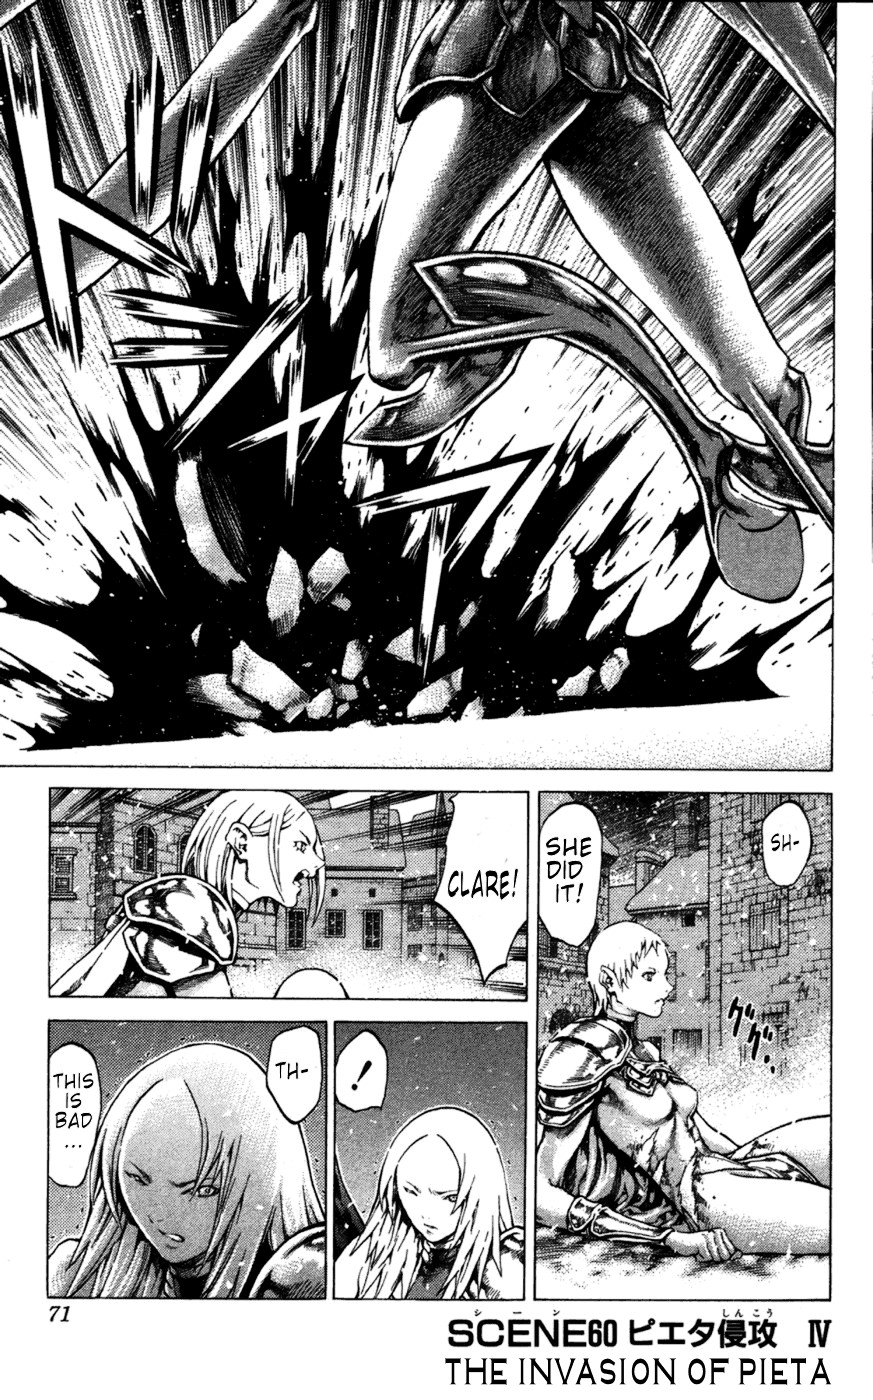 Claymore - Chapter 60 - Read Free Manga Online at Bato.To